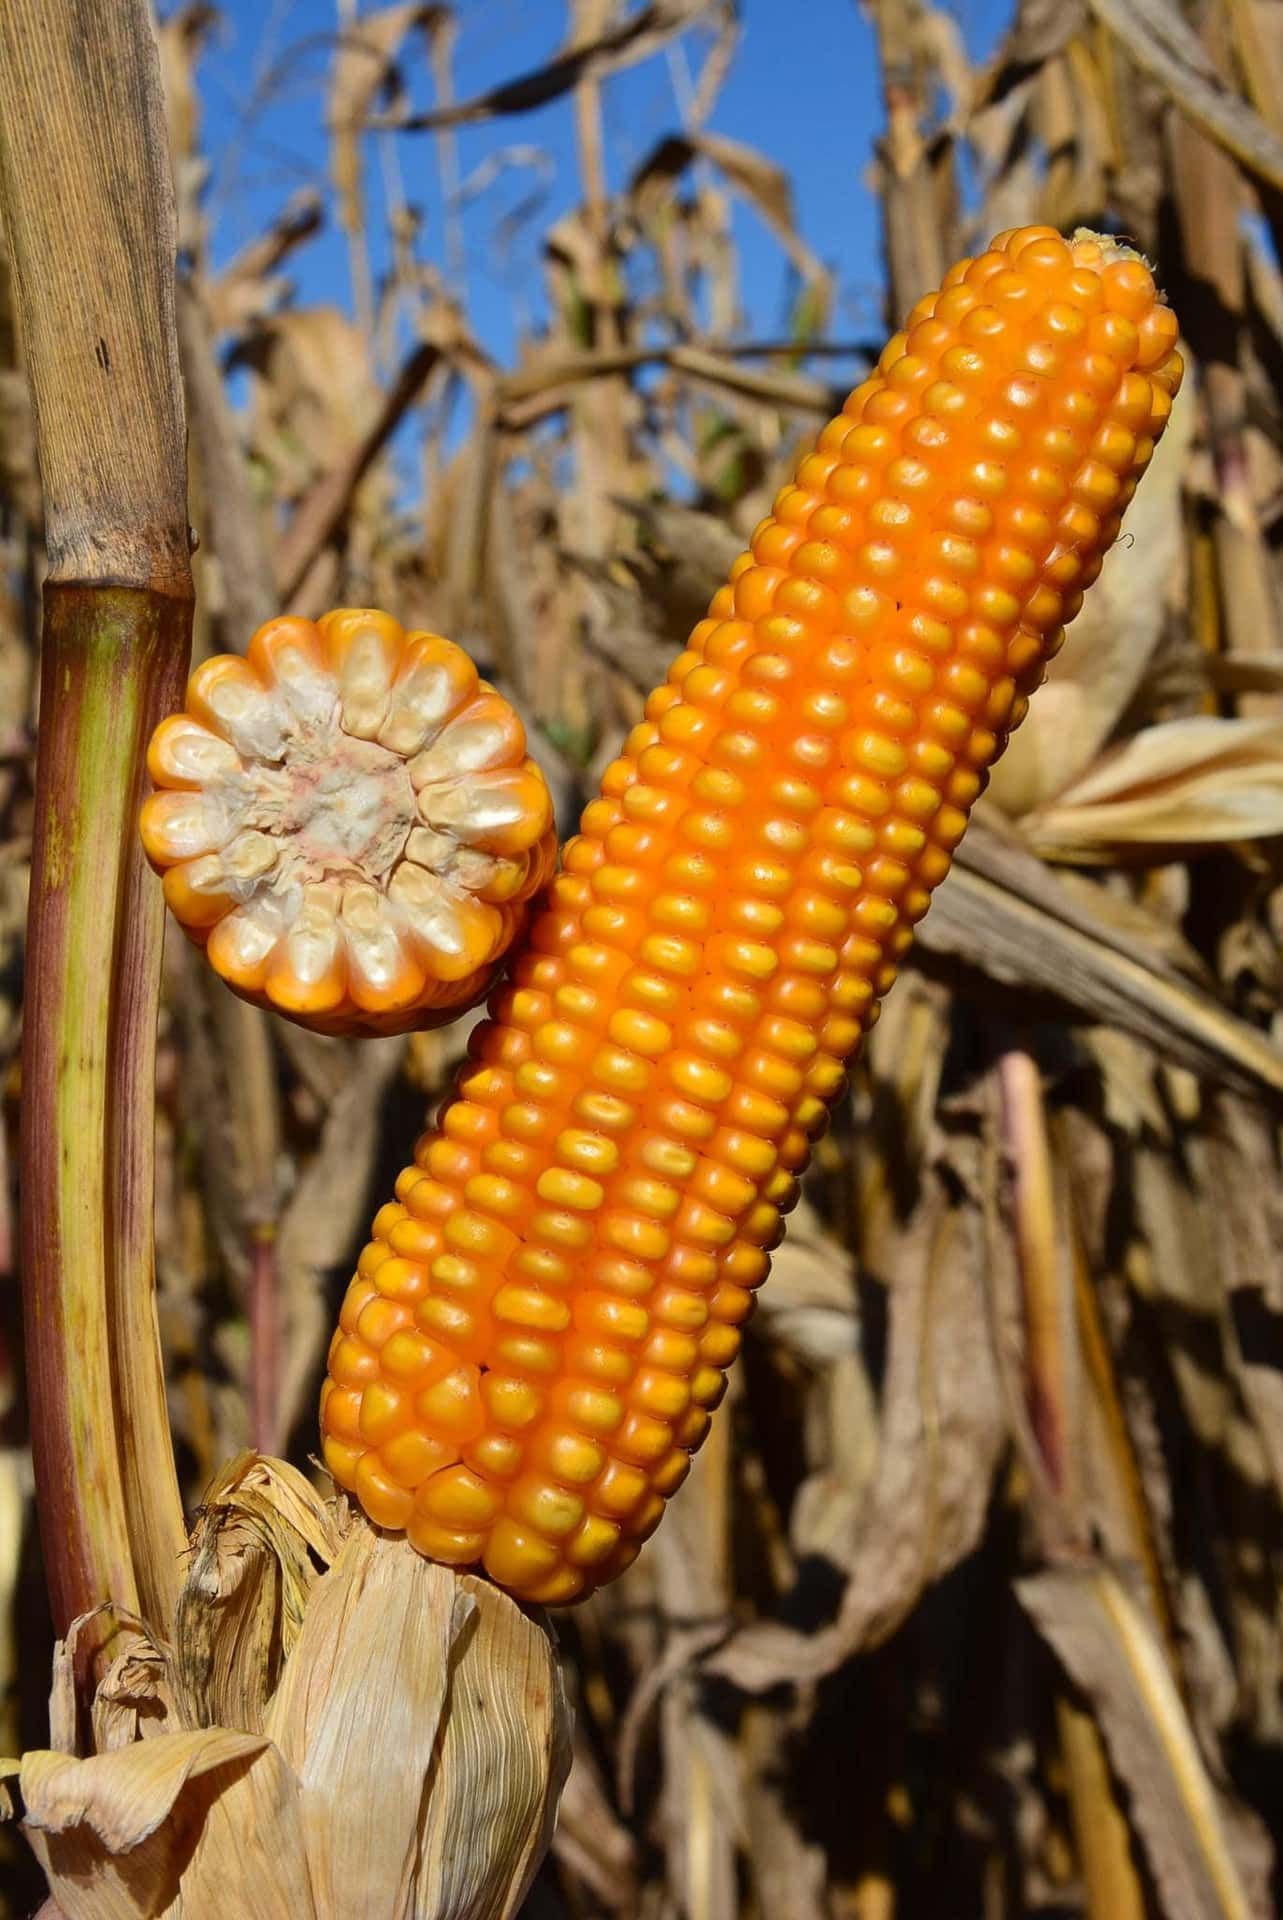 ES HUBBLE
VERY EARLY CORN